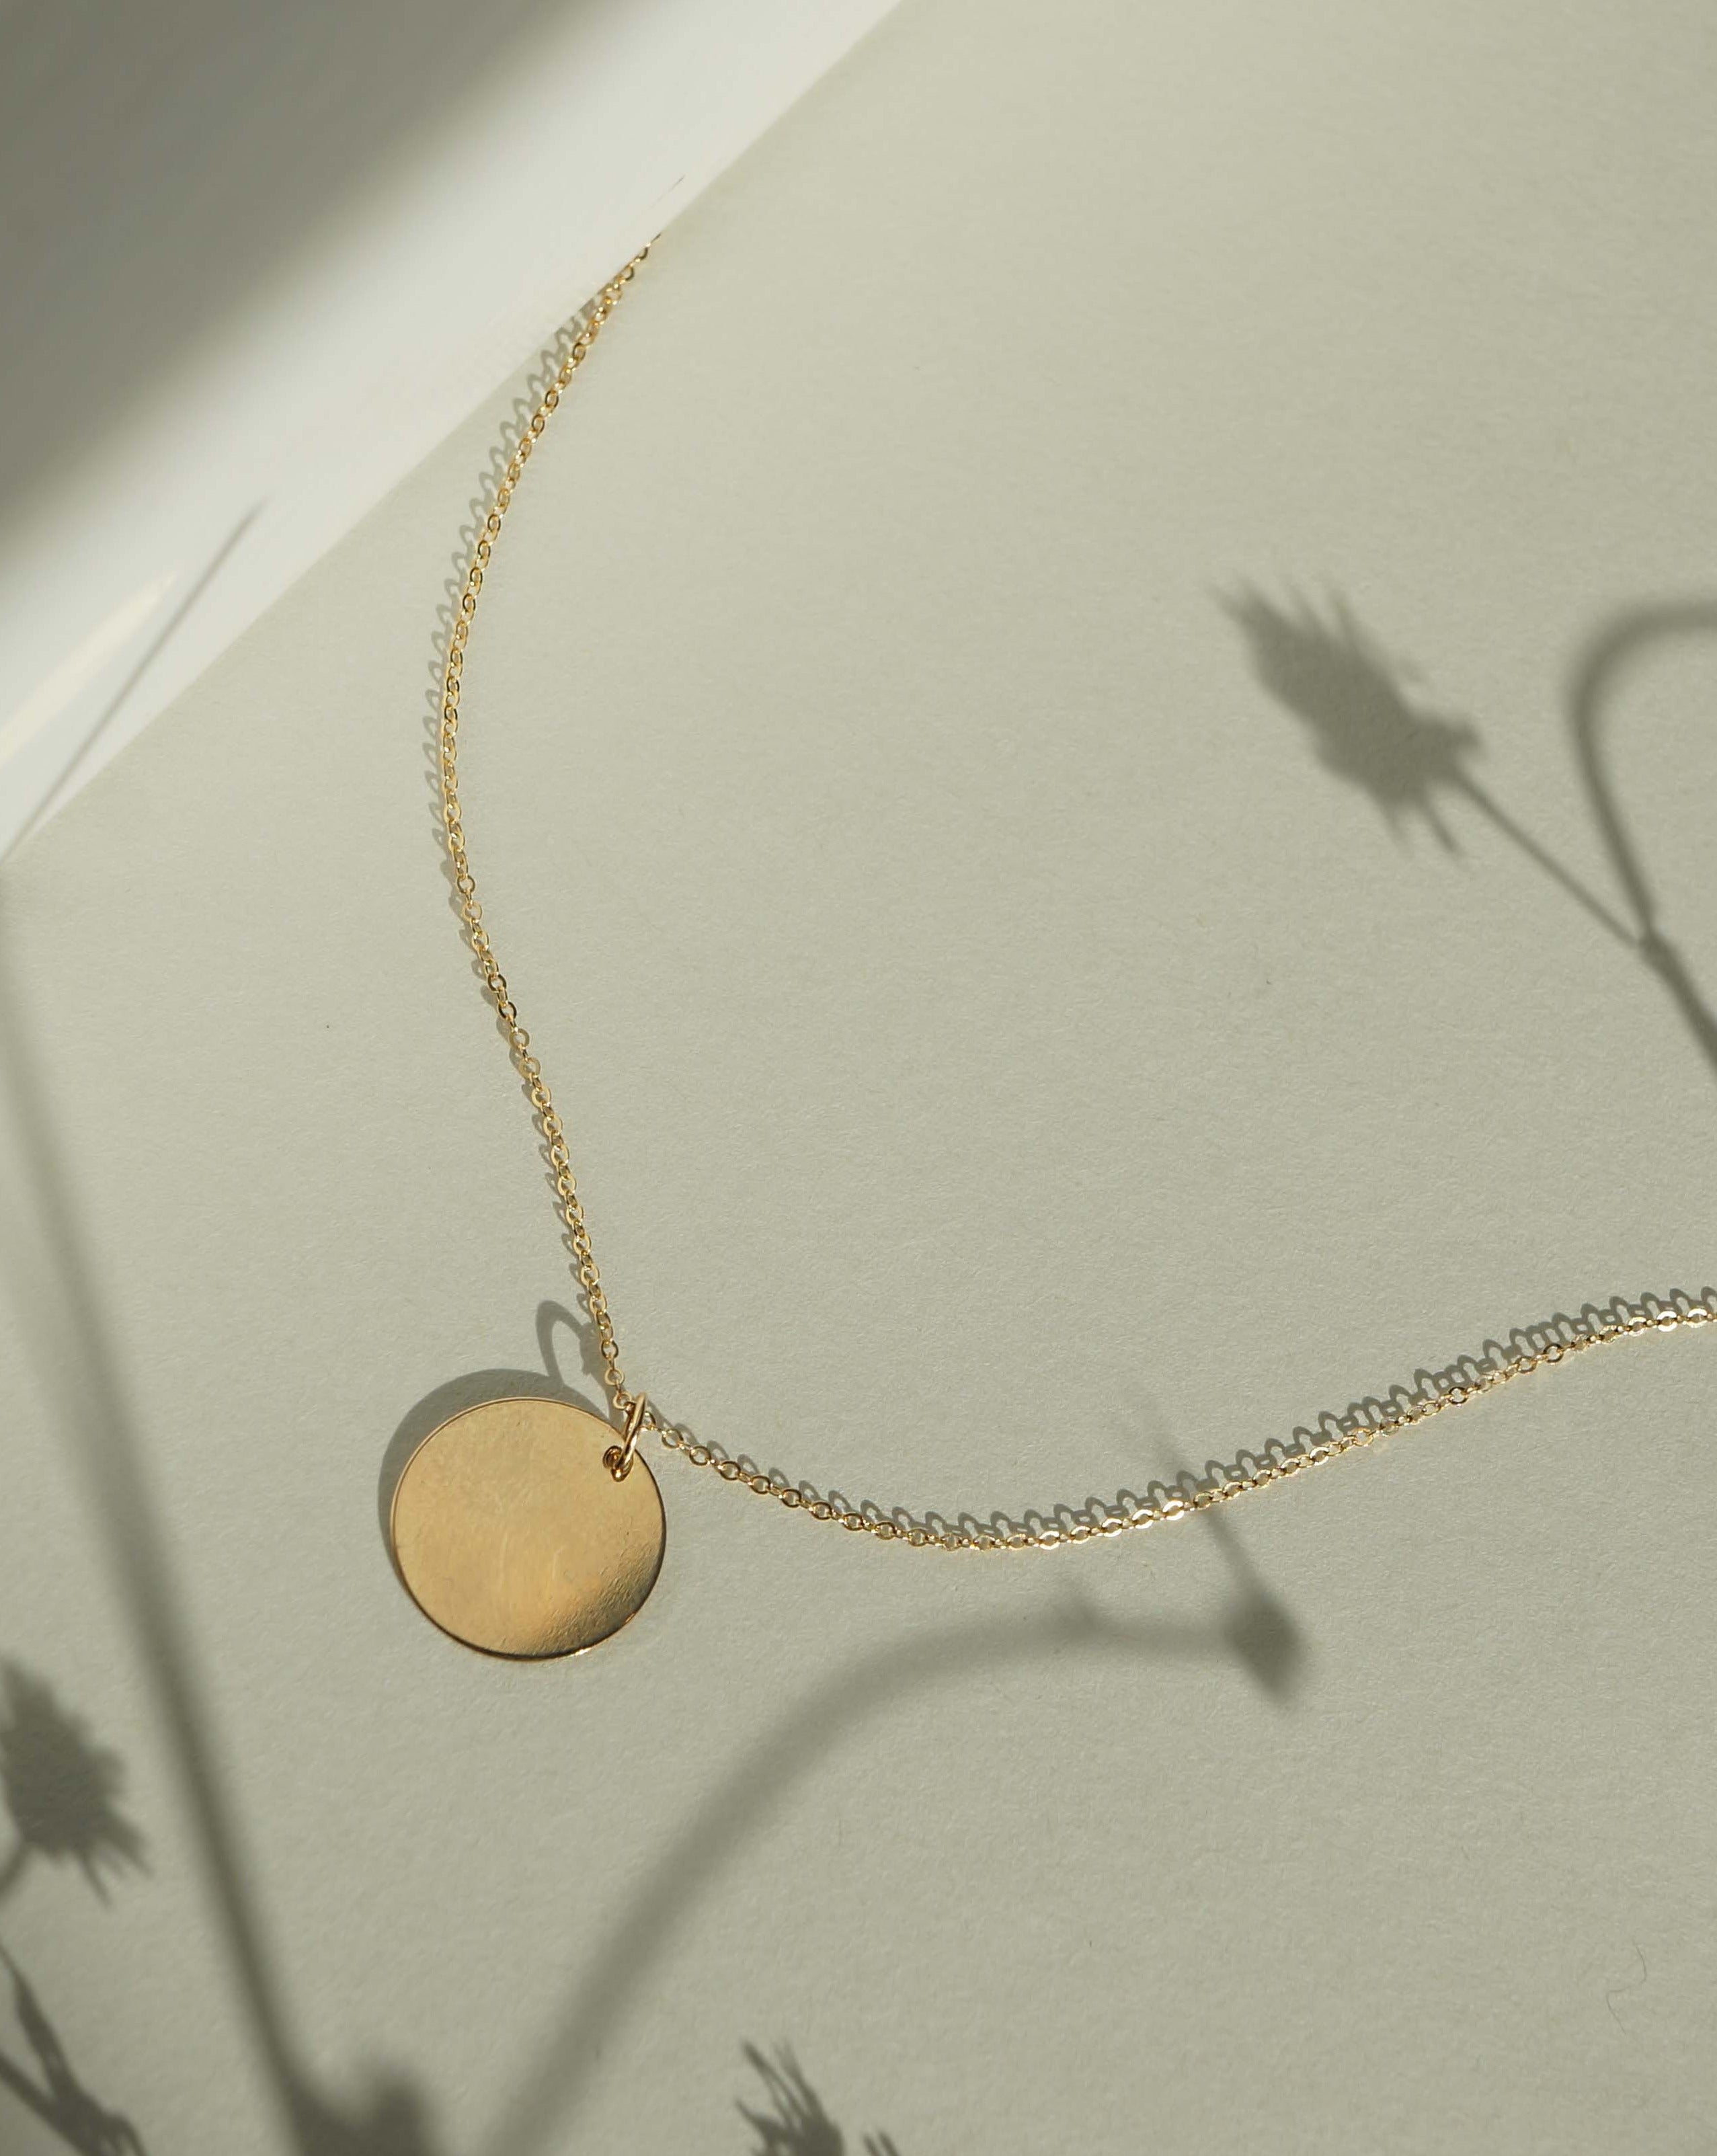 Chloe Necklace by KOZAKH. A 16 inch long Rollo chain necklace in 14K Gold Filled, featuring a 16mm Coin medallion.